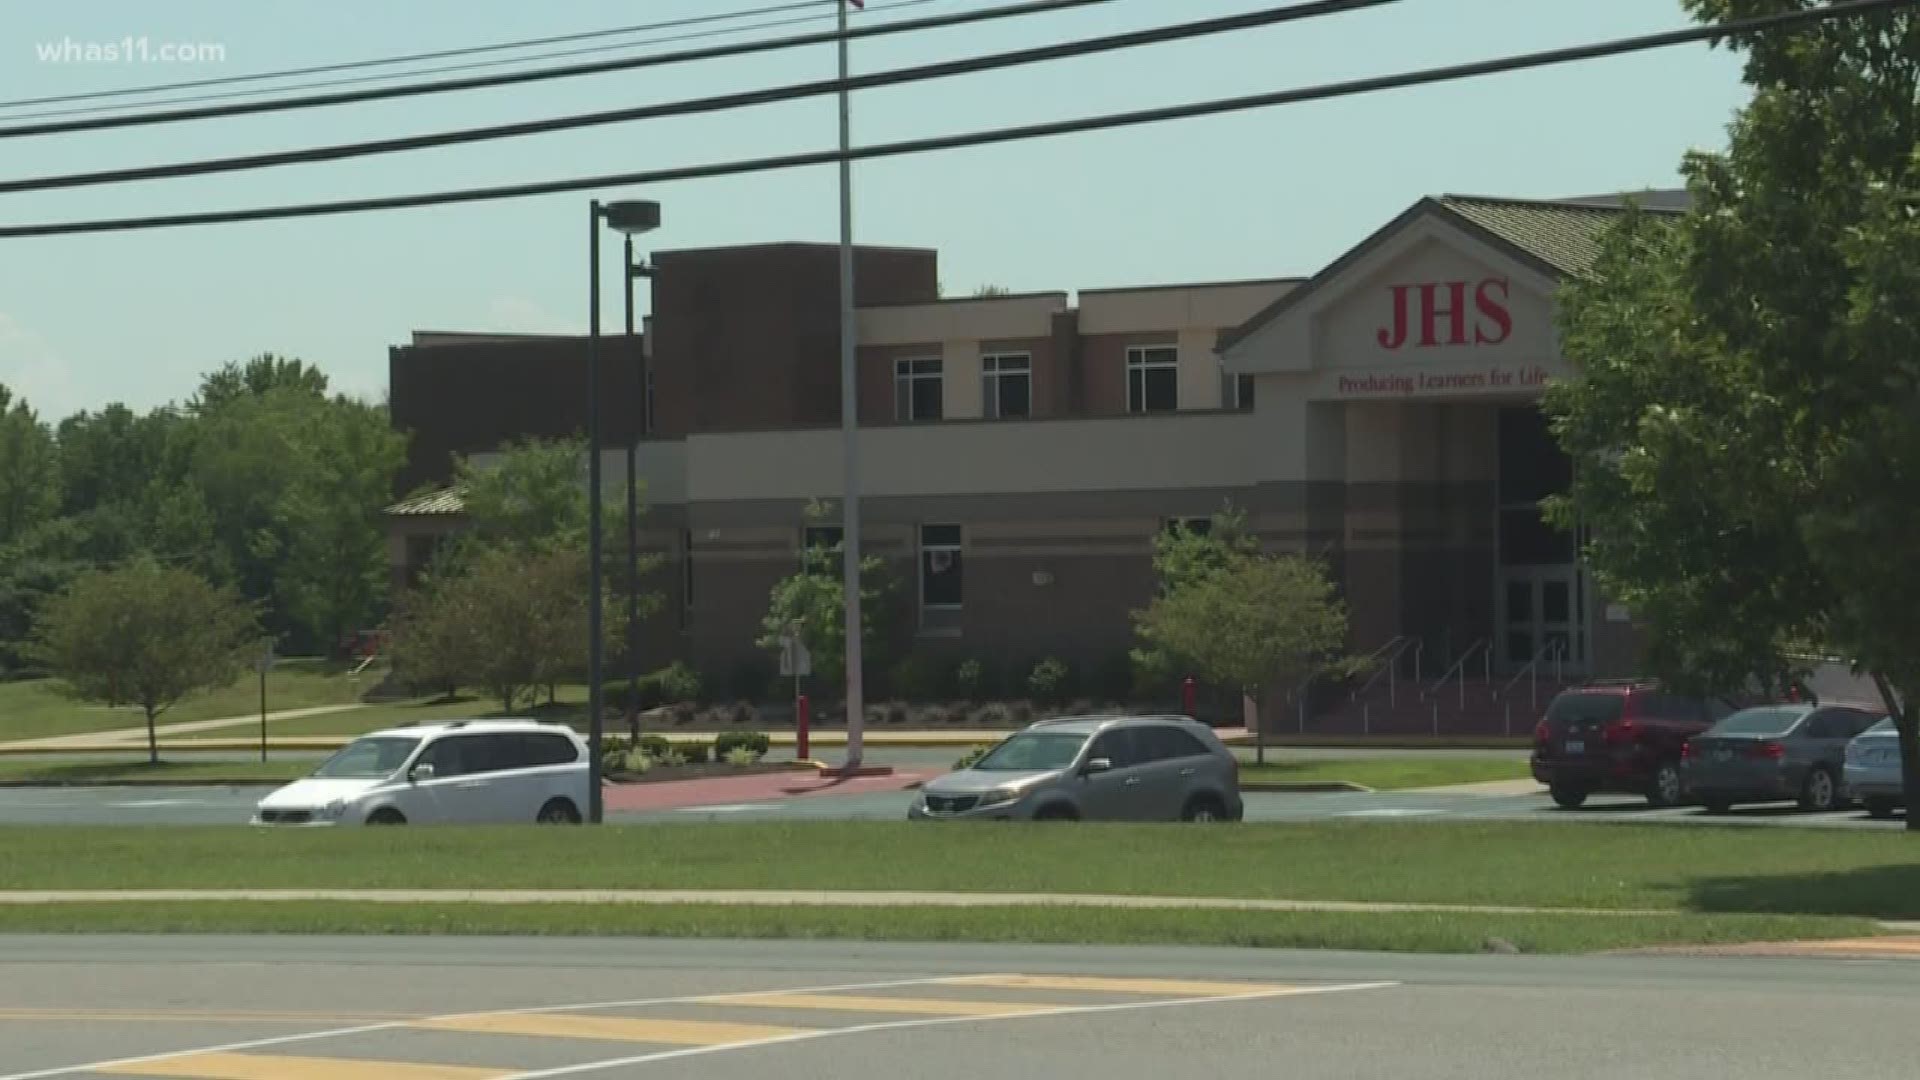 Just a few weeks before the start of the new school year for Greater Clark County Schools-- parents in Jeffersonville, Indiana are worried about their children being forced to walk miles to Jeffersonville High School.